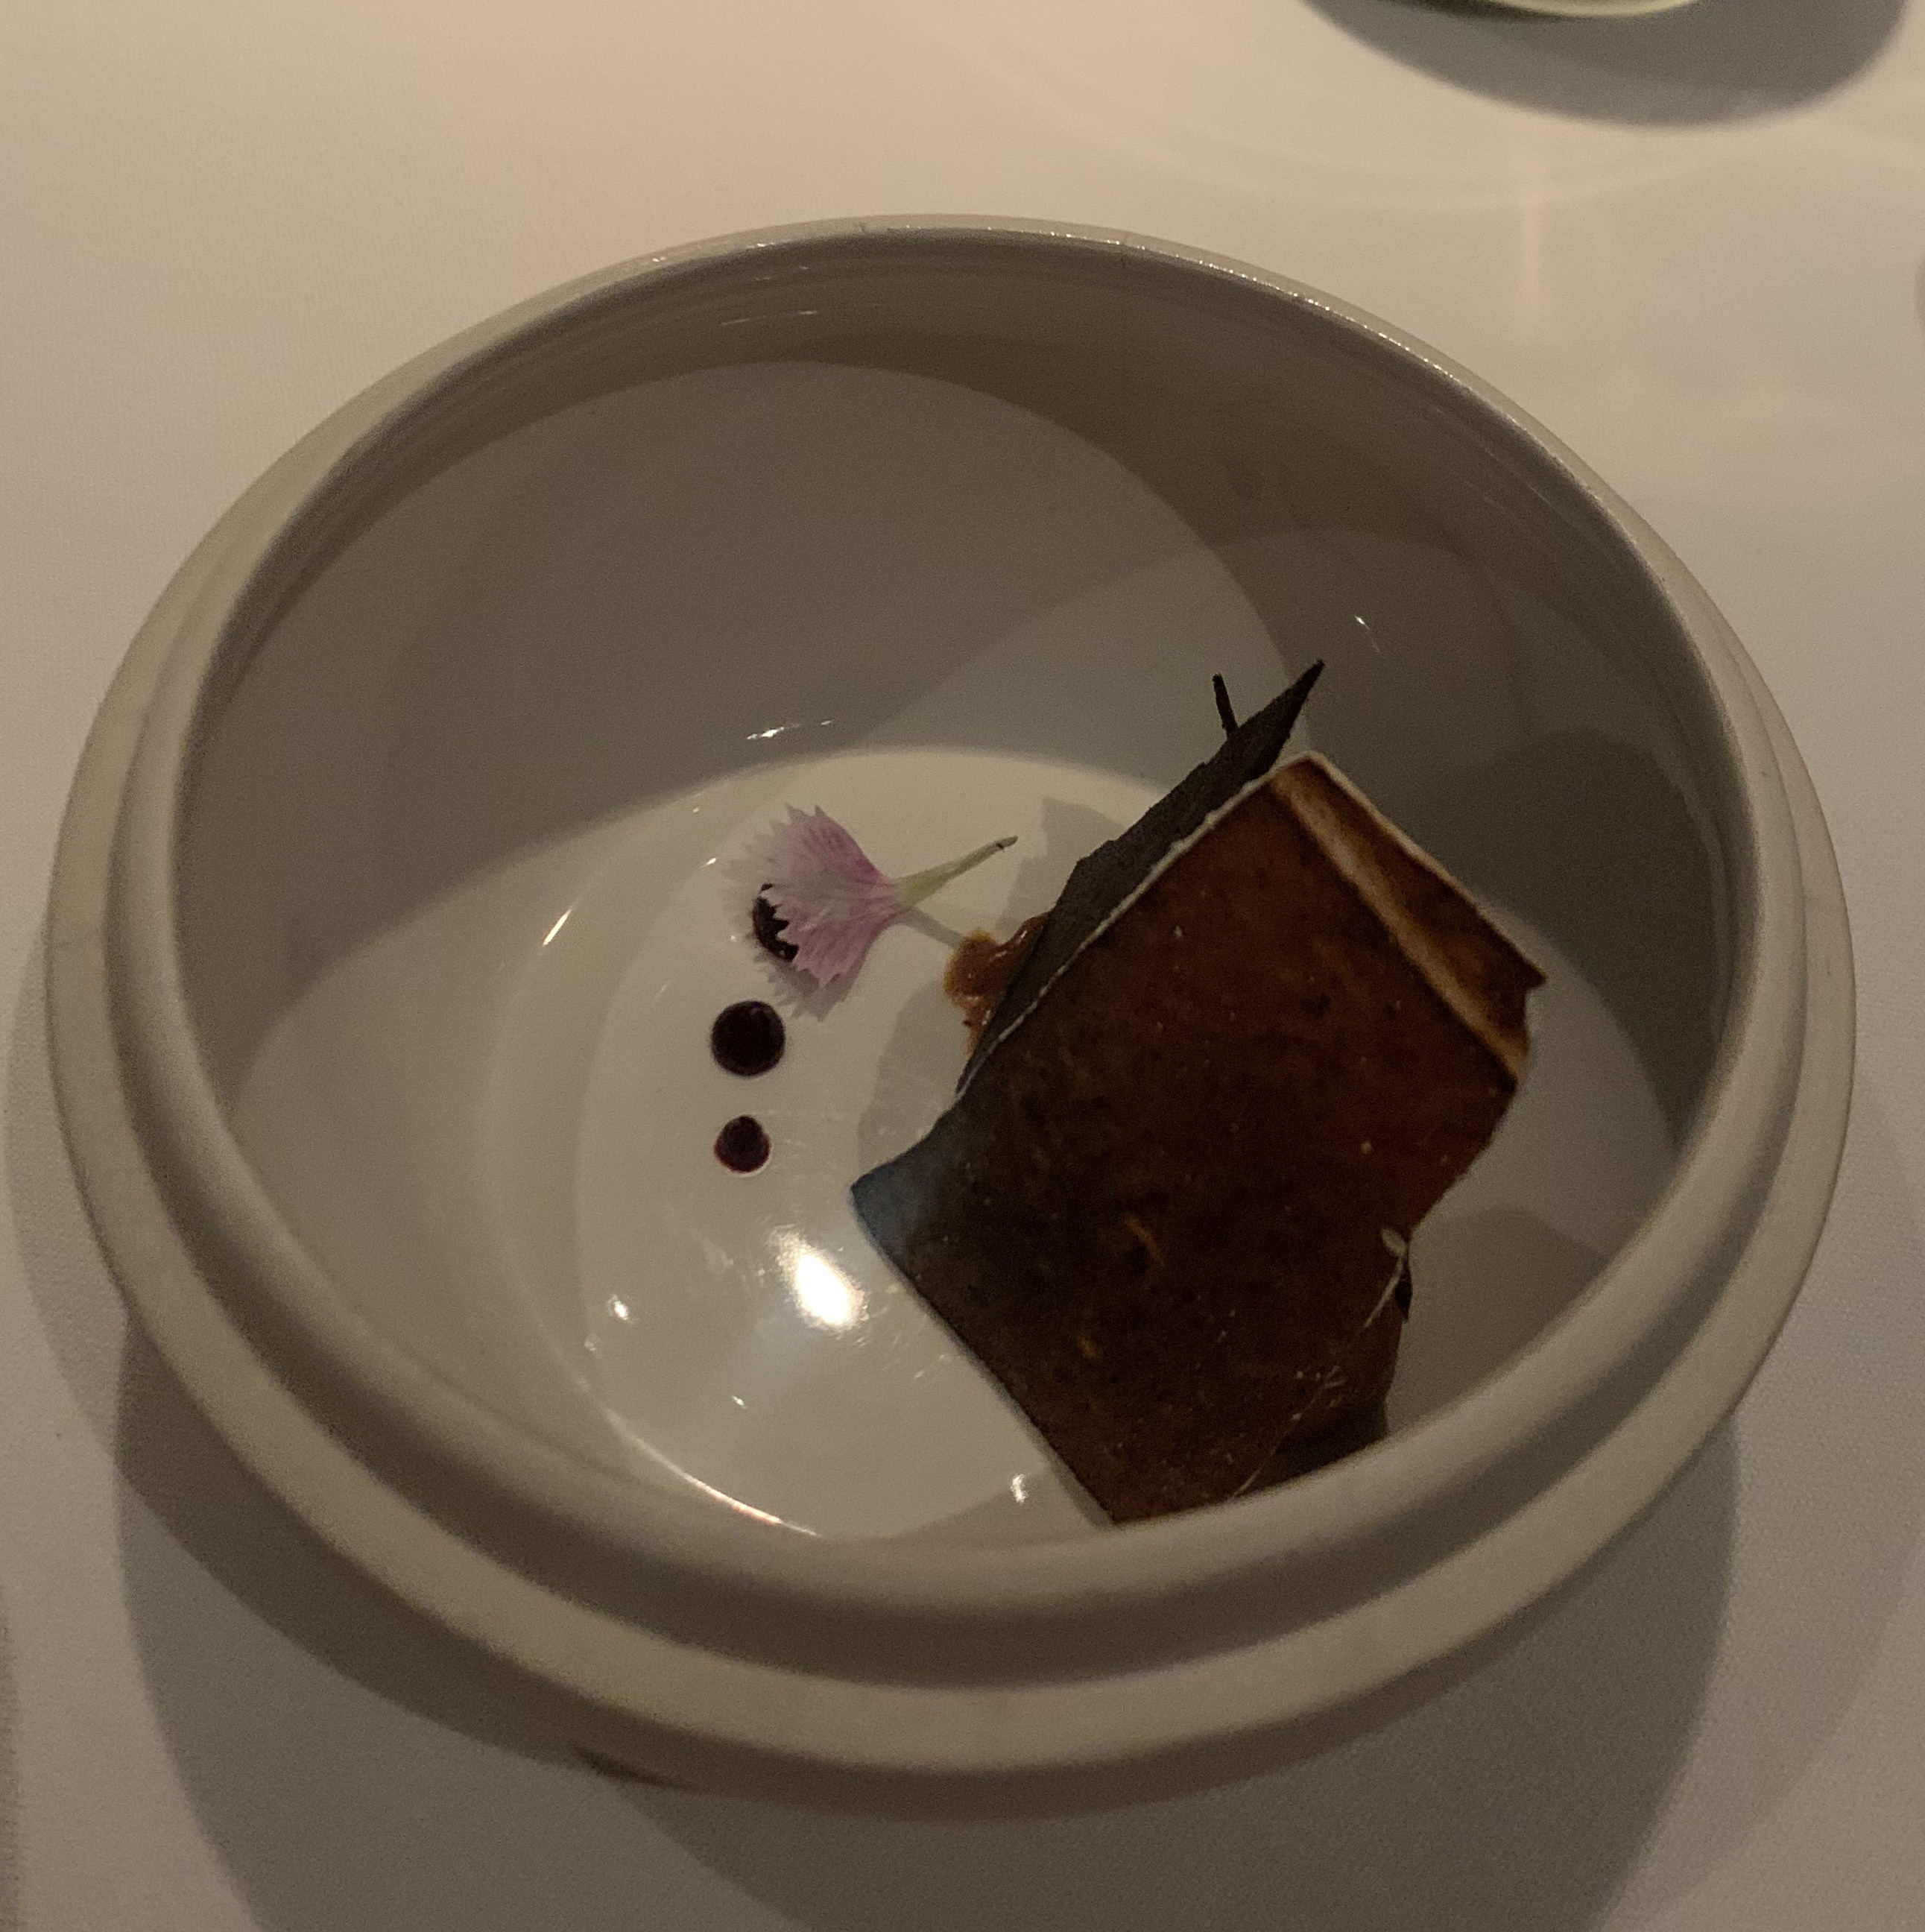 Off-white bowl containing some sheets of dark brown merigune standing up, hiding something. Next to them are three dots of chocolate sauce, with the top dot being larger and the two below it decreasing in size. There is one pink flower garnishing the dish, obscuring the top chocolate sauce dot.